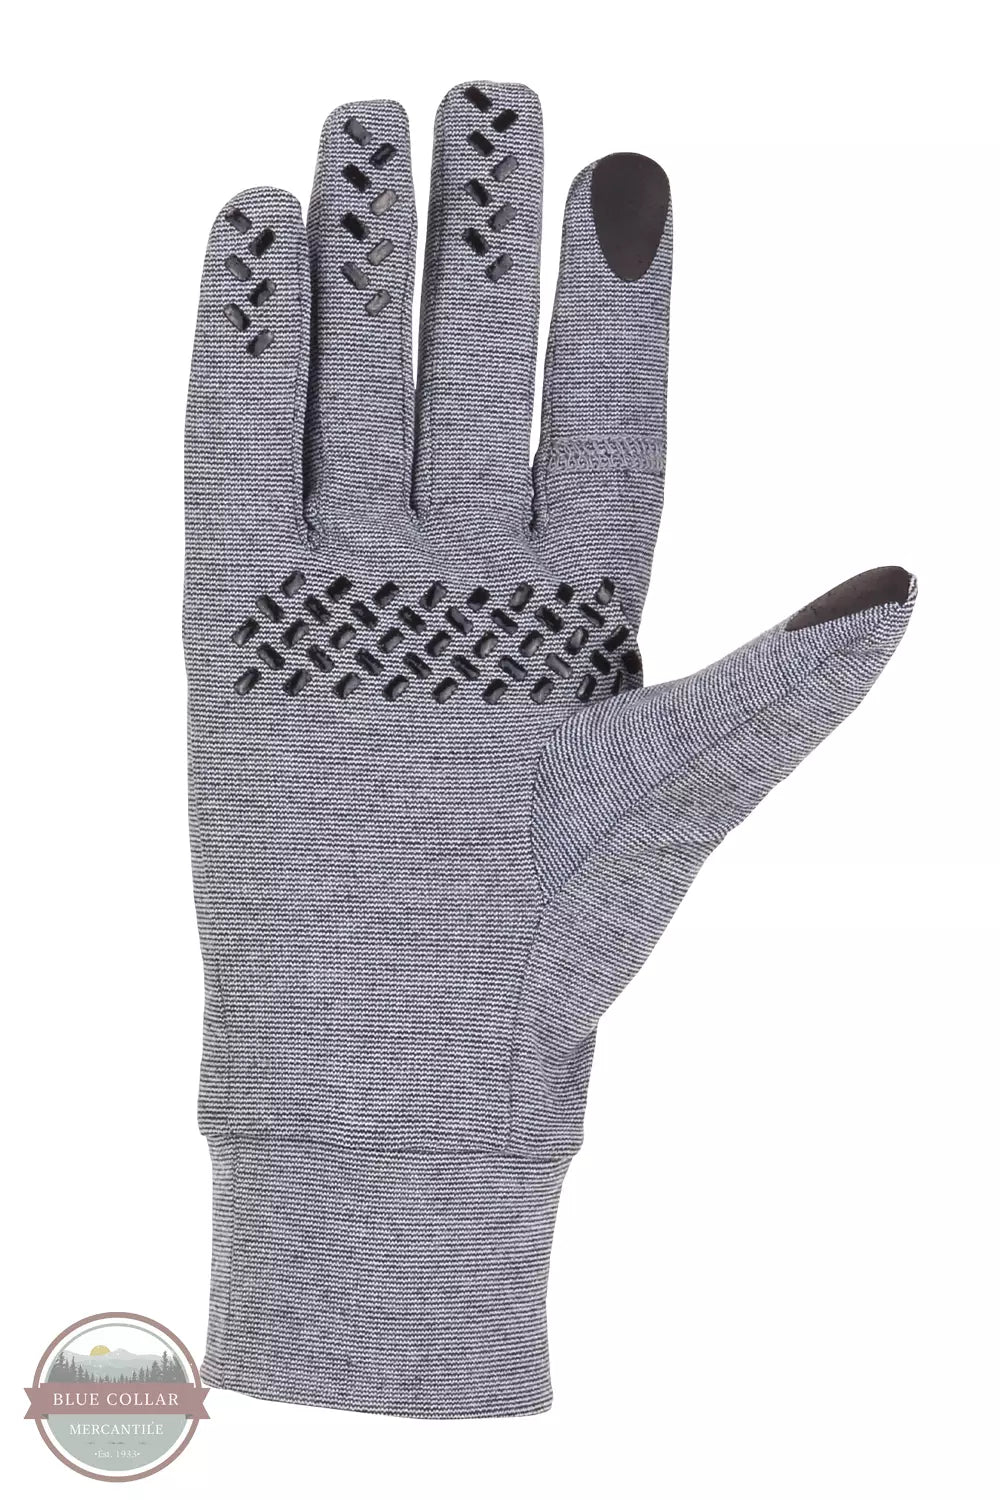 Carhartt WA749/GF0749 Ladies Force Heavyweight Liner Knit Gloves in Shadow Heather Palm View